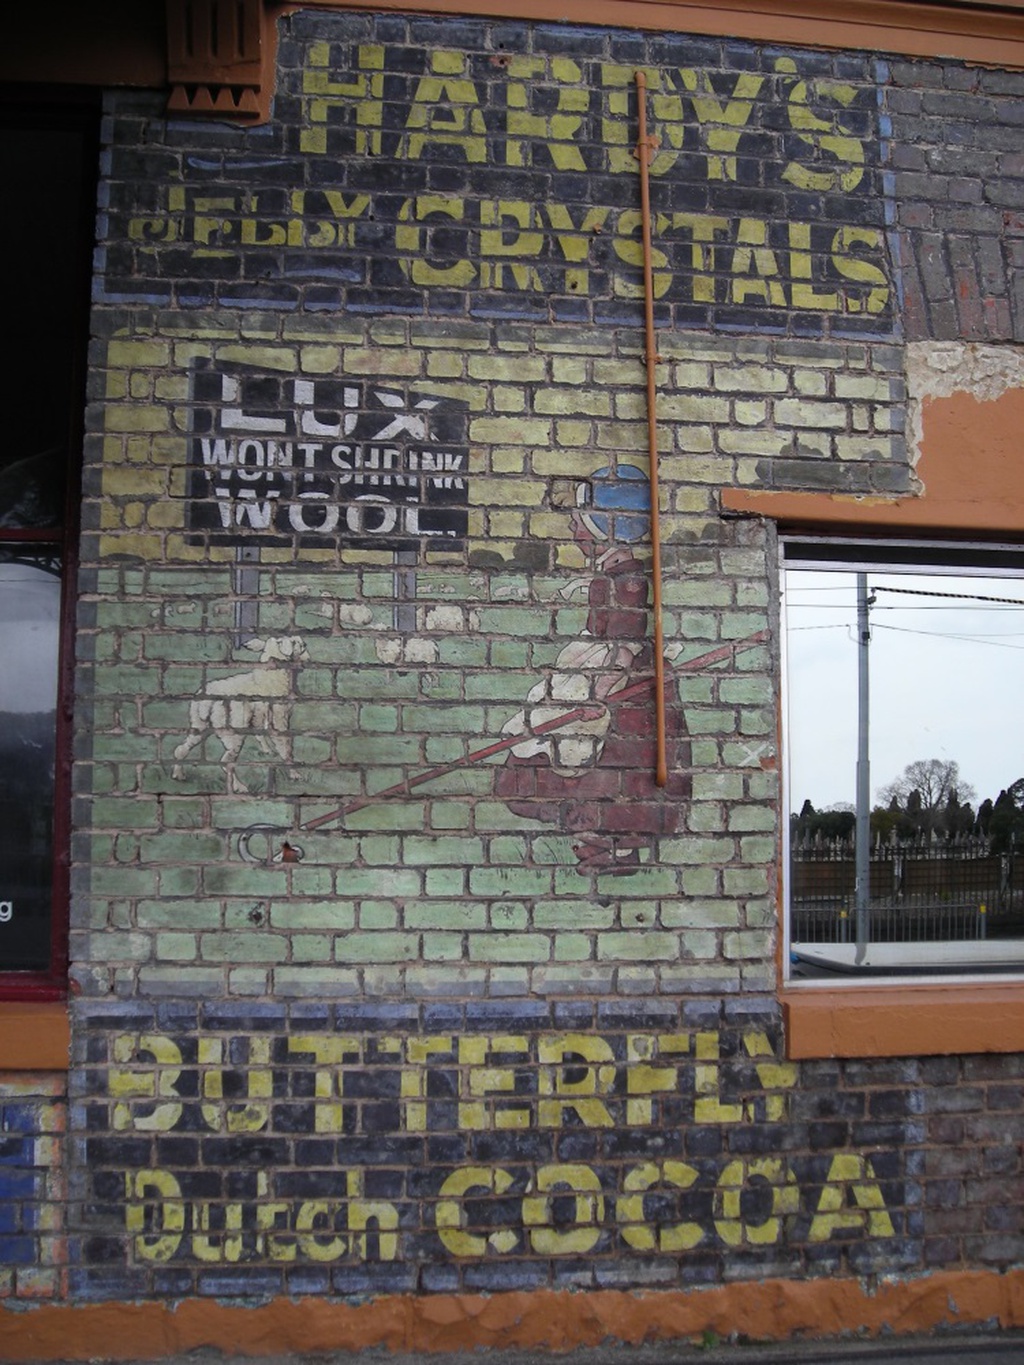 Advertising signage for Hardy's jelly crystals, Lux soap flakes and Butterfly Dutch cocoa